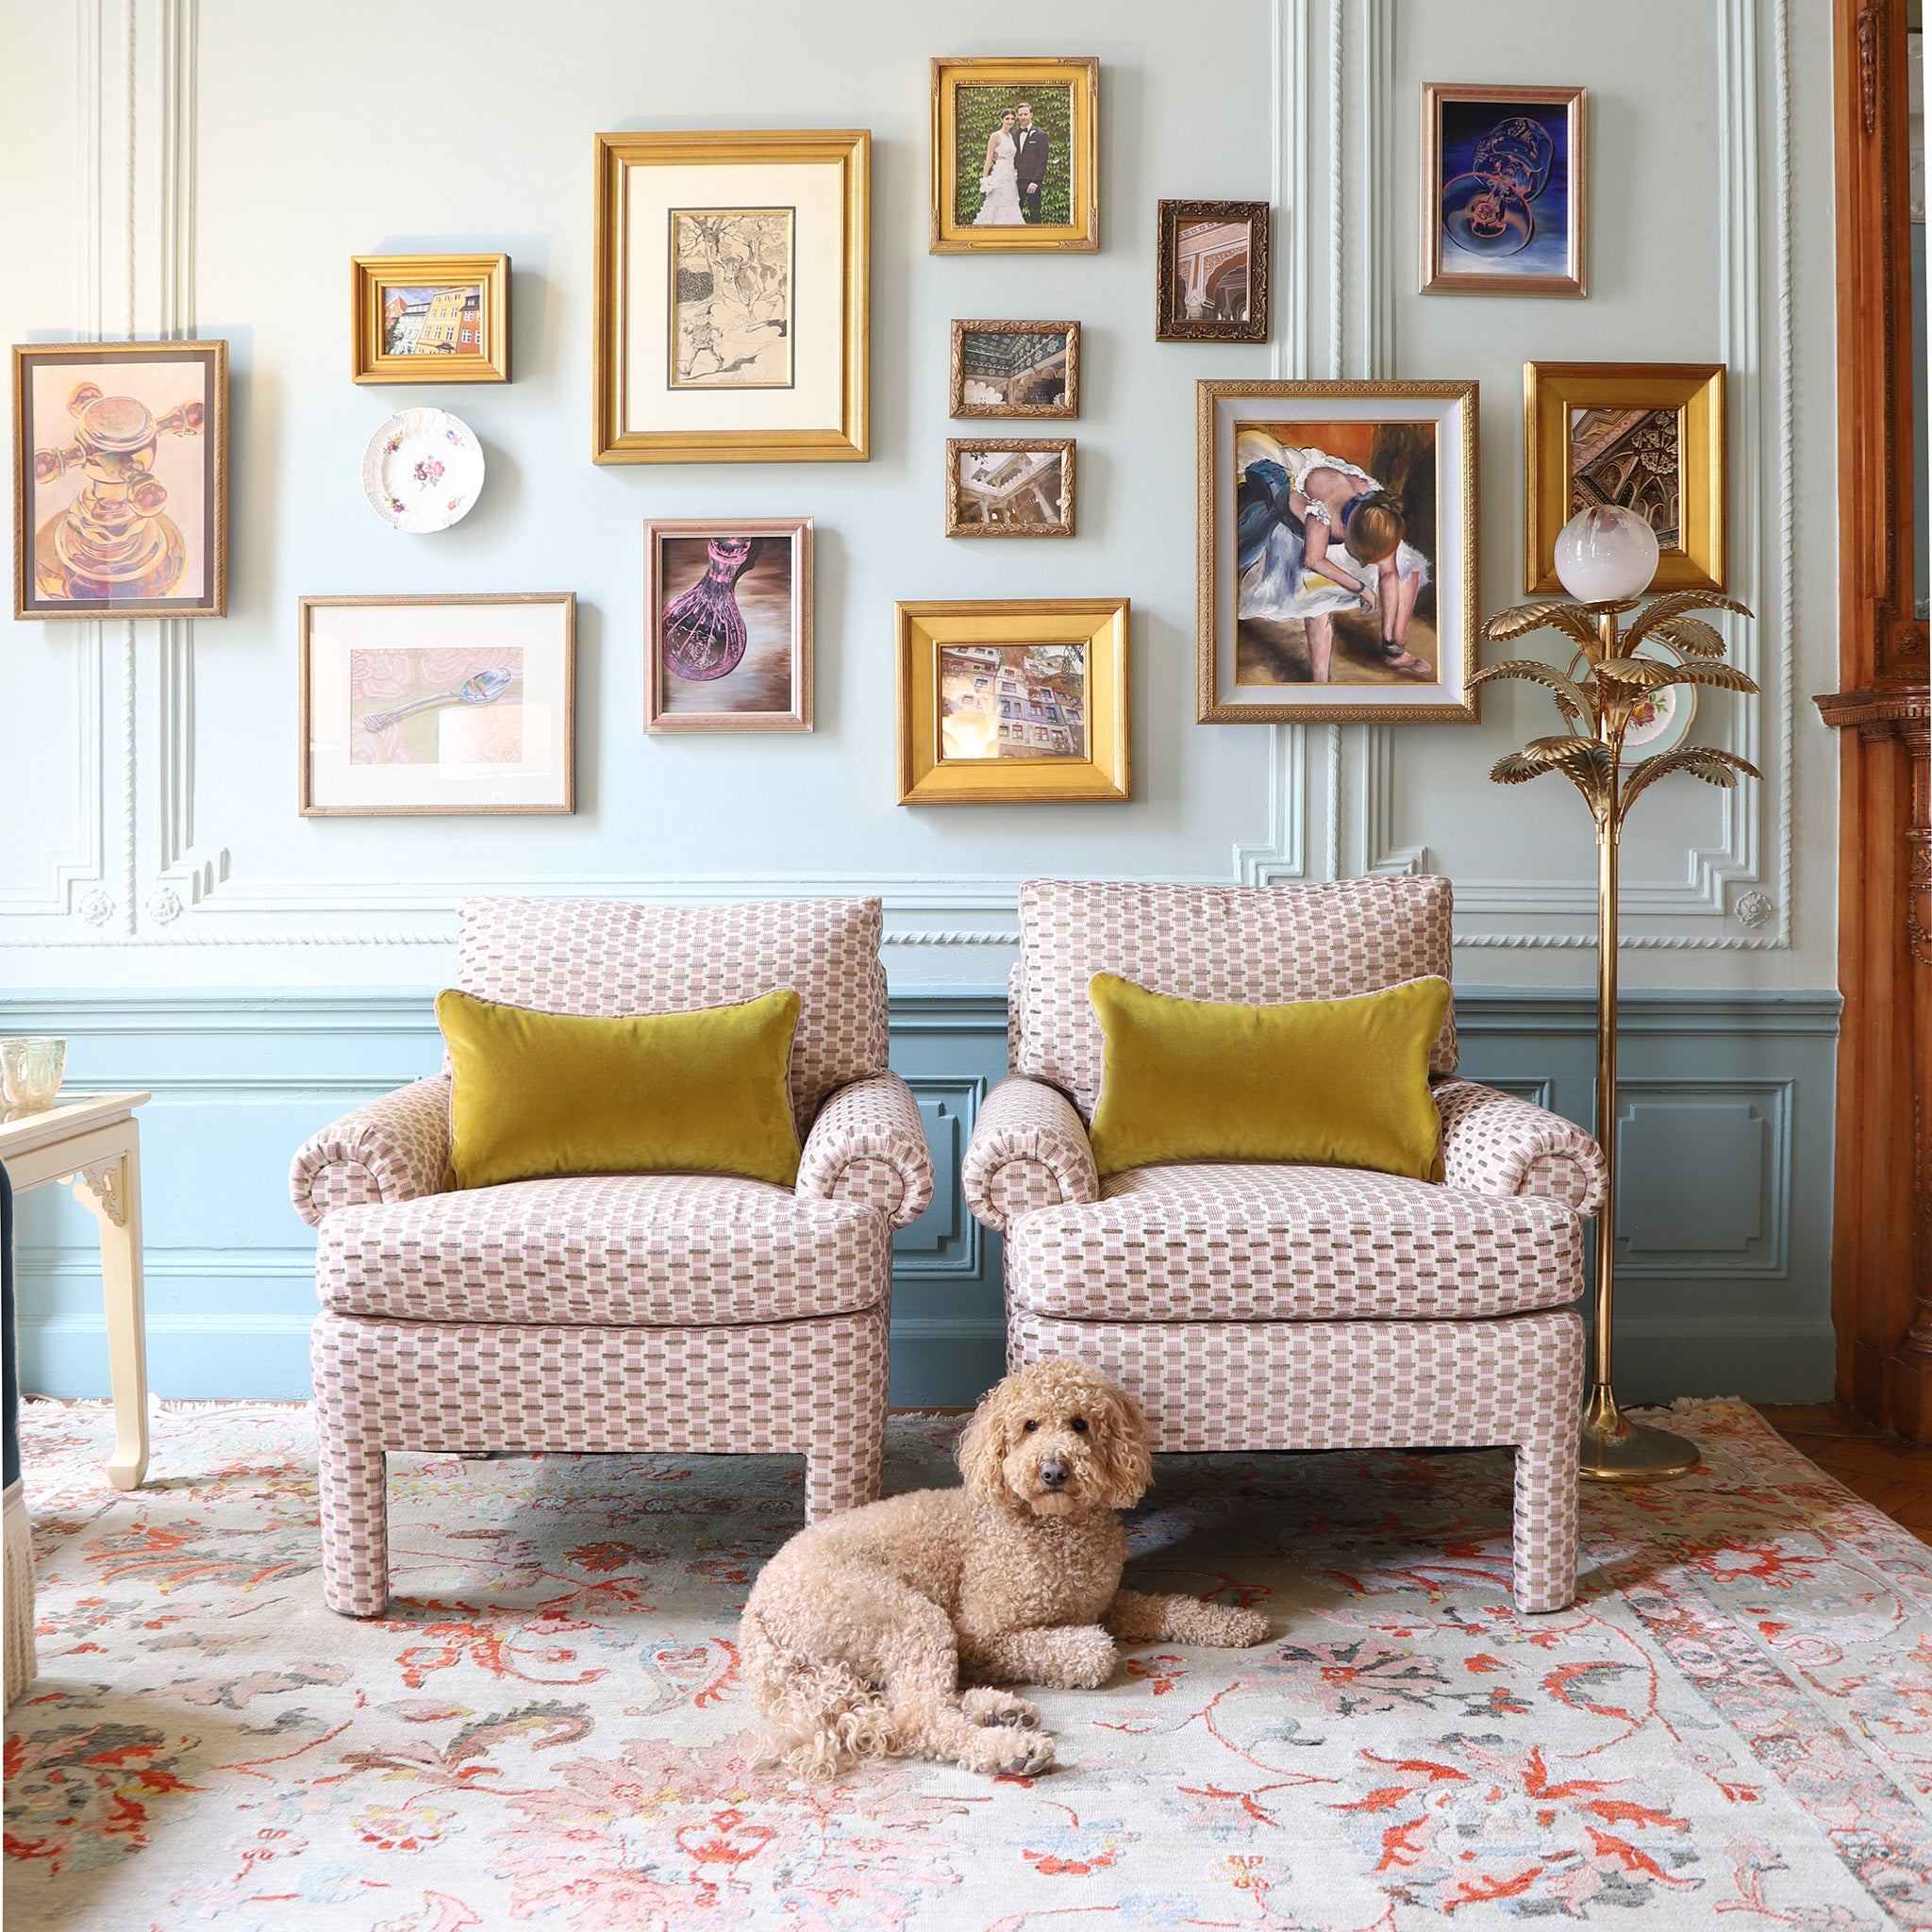 chenille and woven jacquard pink and citron geometric  chairs with golden chartreuse pillows on them in front of a blue wall with artwork hung on the wall